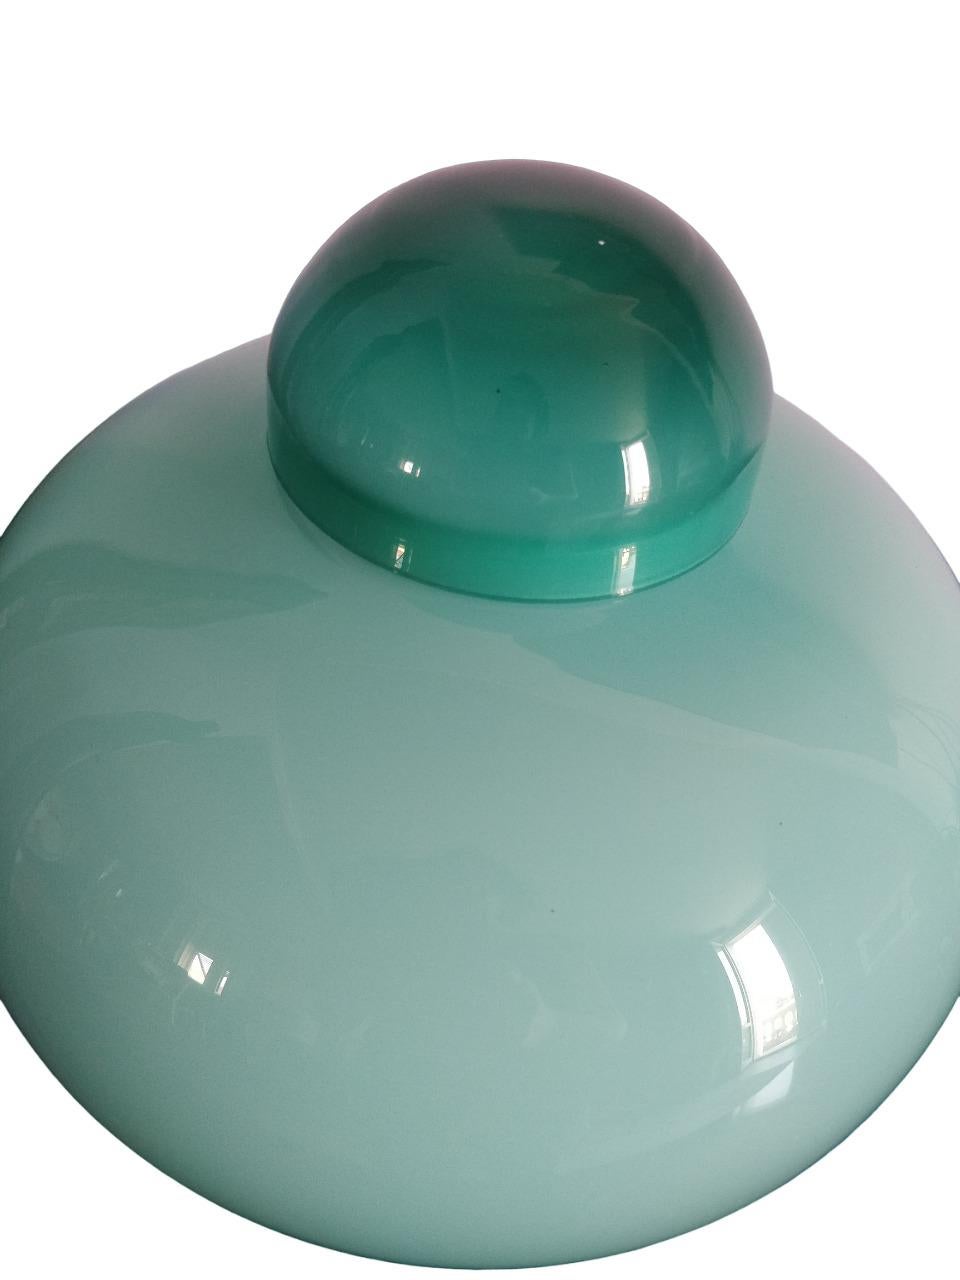 The described vase is an elegant work of green glass, with a round shape that develops with a diameter of 25 cm and a height of 24 cm. The choice of green glass adds a touch of freshness and nature to its overall appearance, imparting a sense of